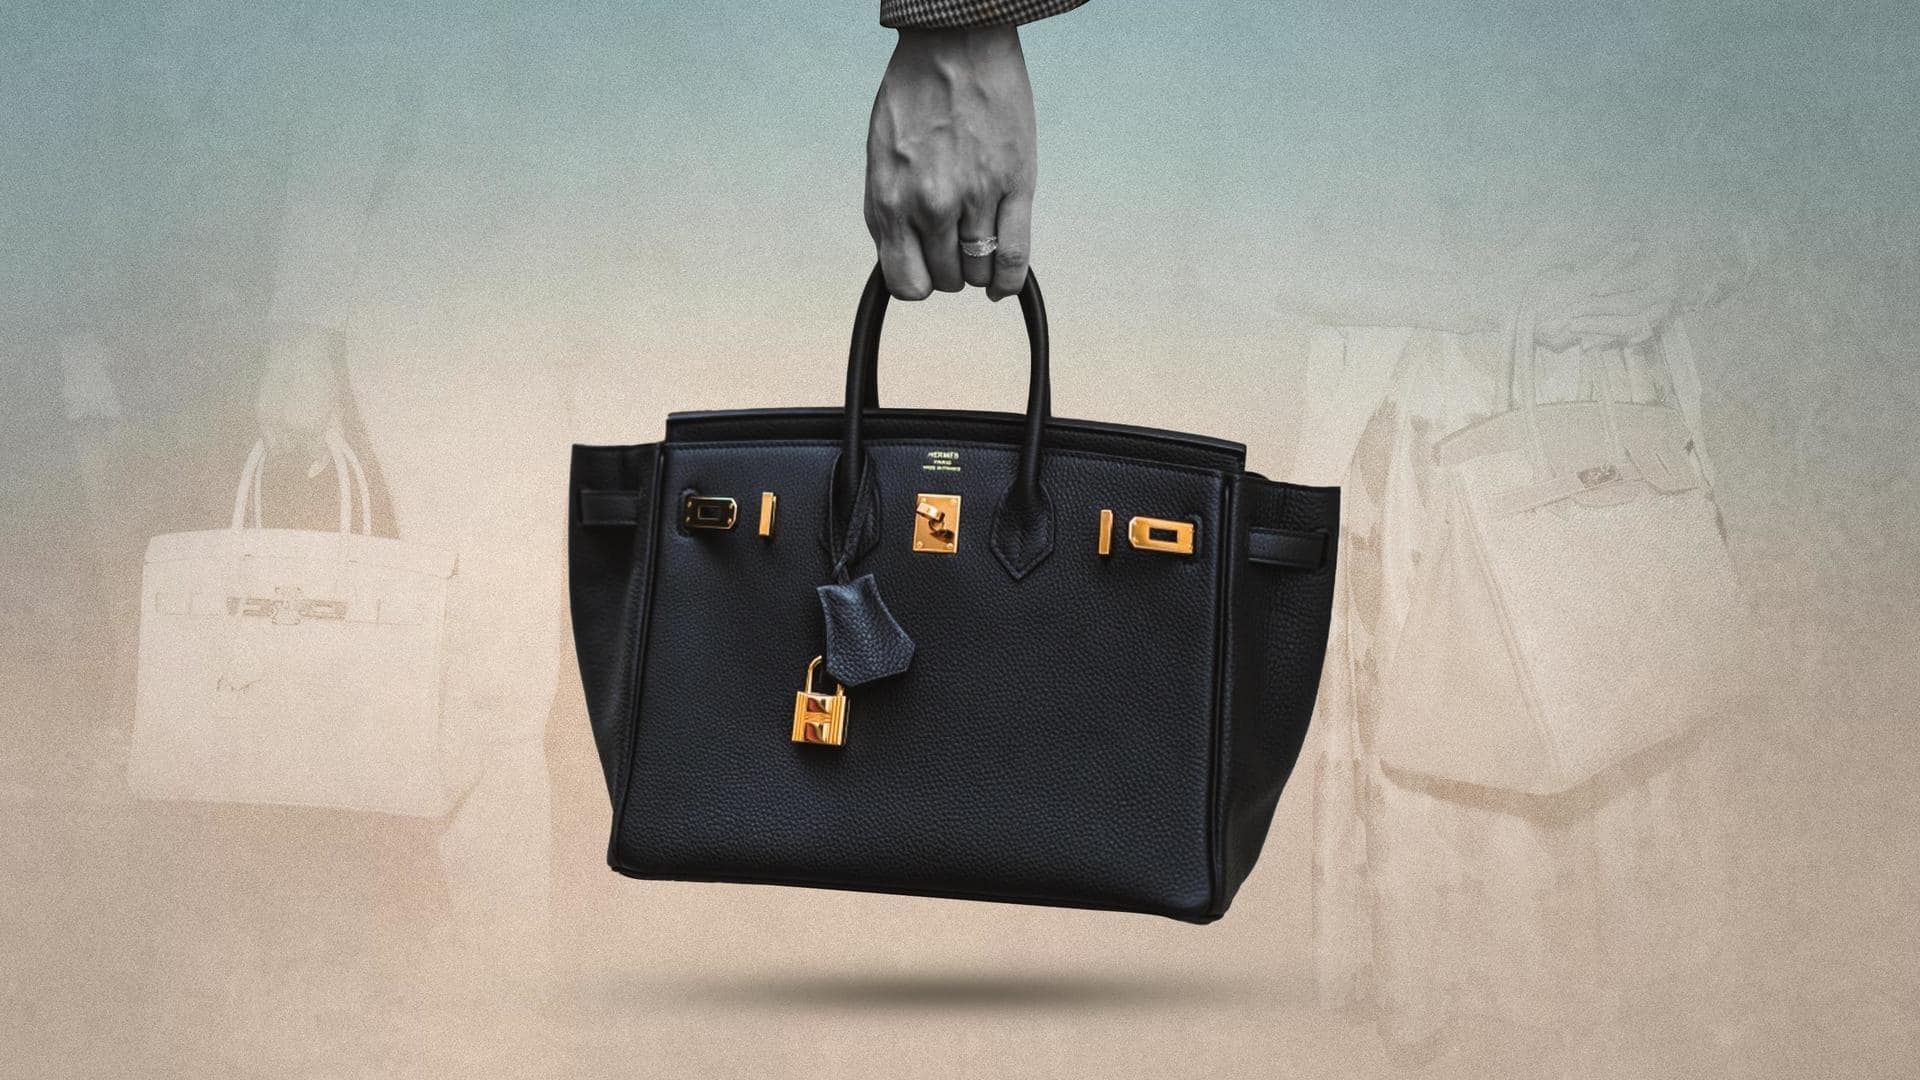 Hermès Birkin bag: Why these coveted bags are so exclusive